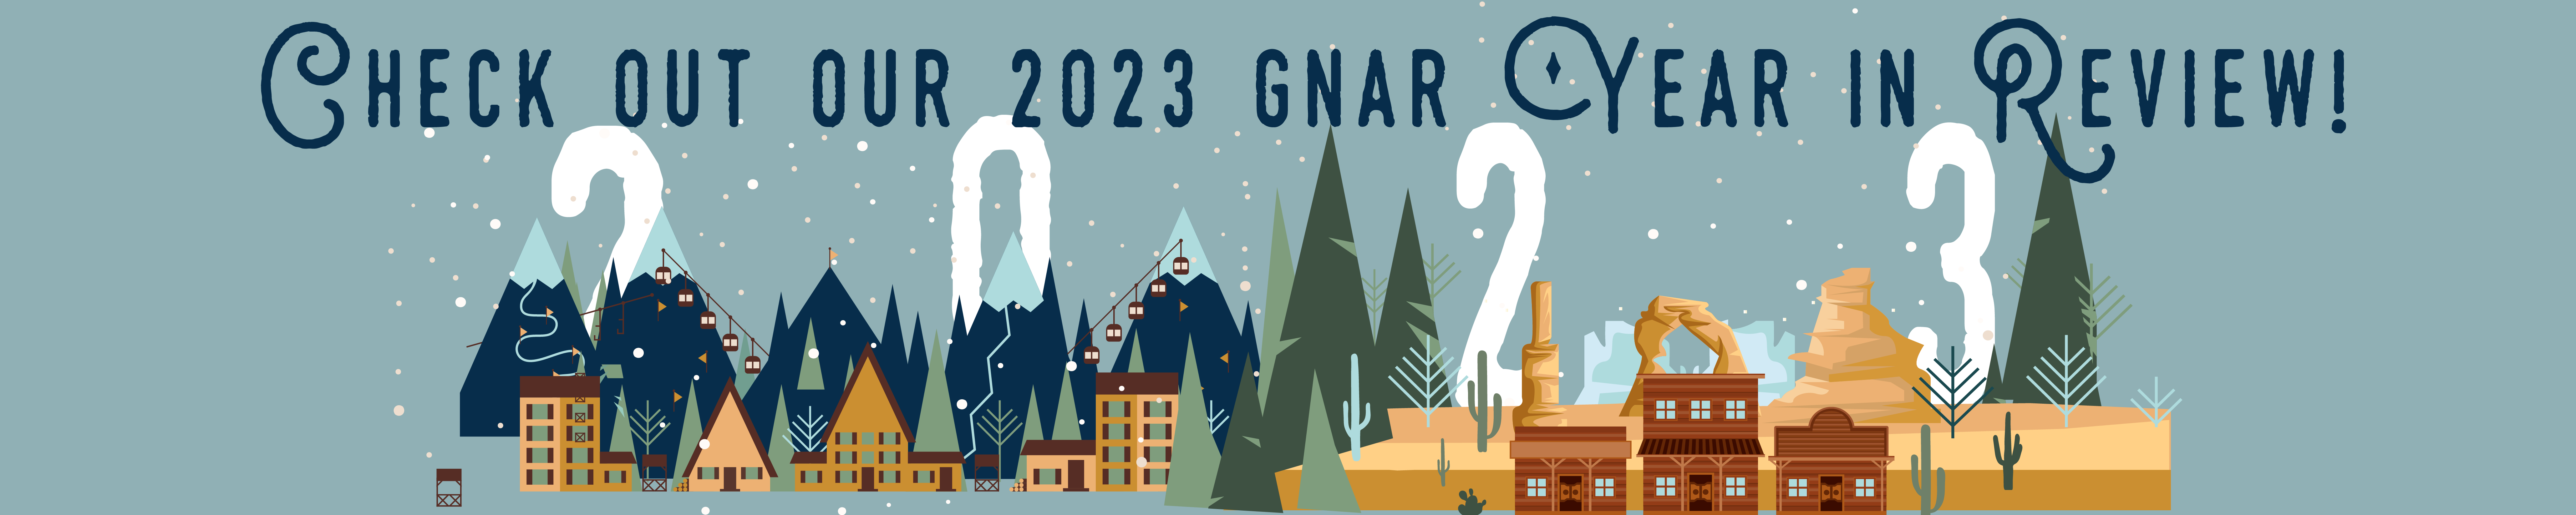 Check out our 2023 GNAR Year in Review